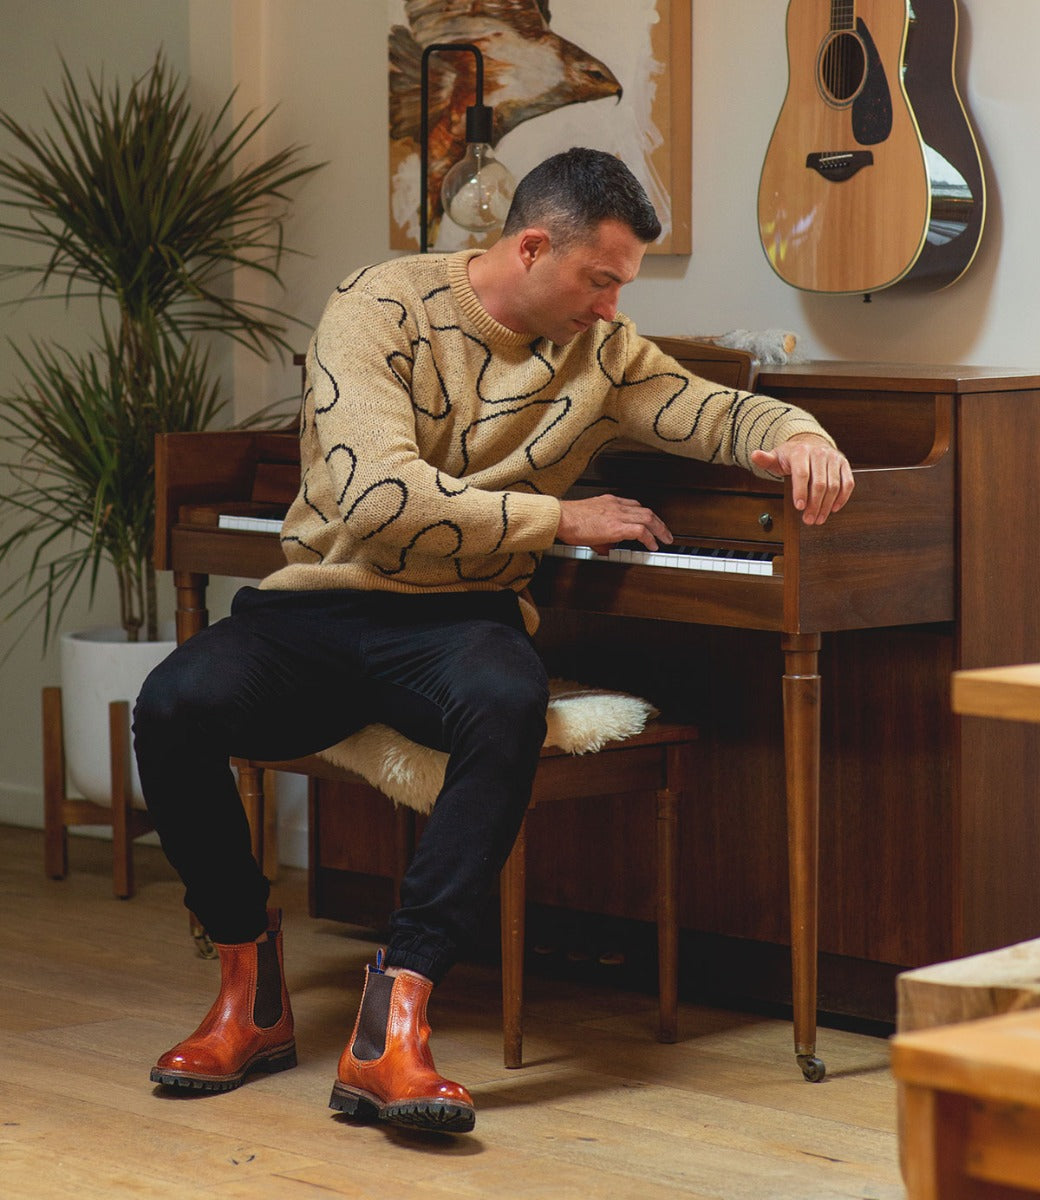 A man in a patterned sweater and Bed Stu Chelsea boots sitting at a piano in a cozy room with a guitar hanging on the wall and plants in the background.